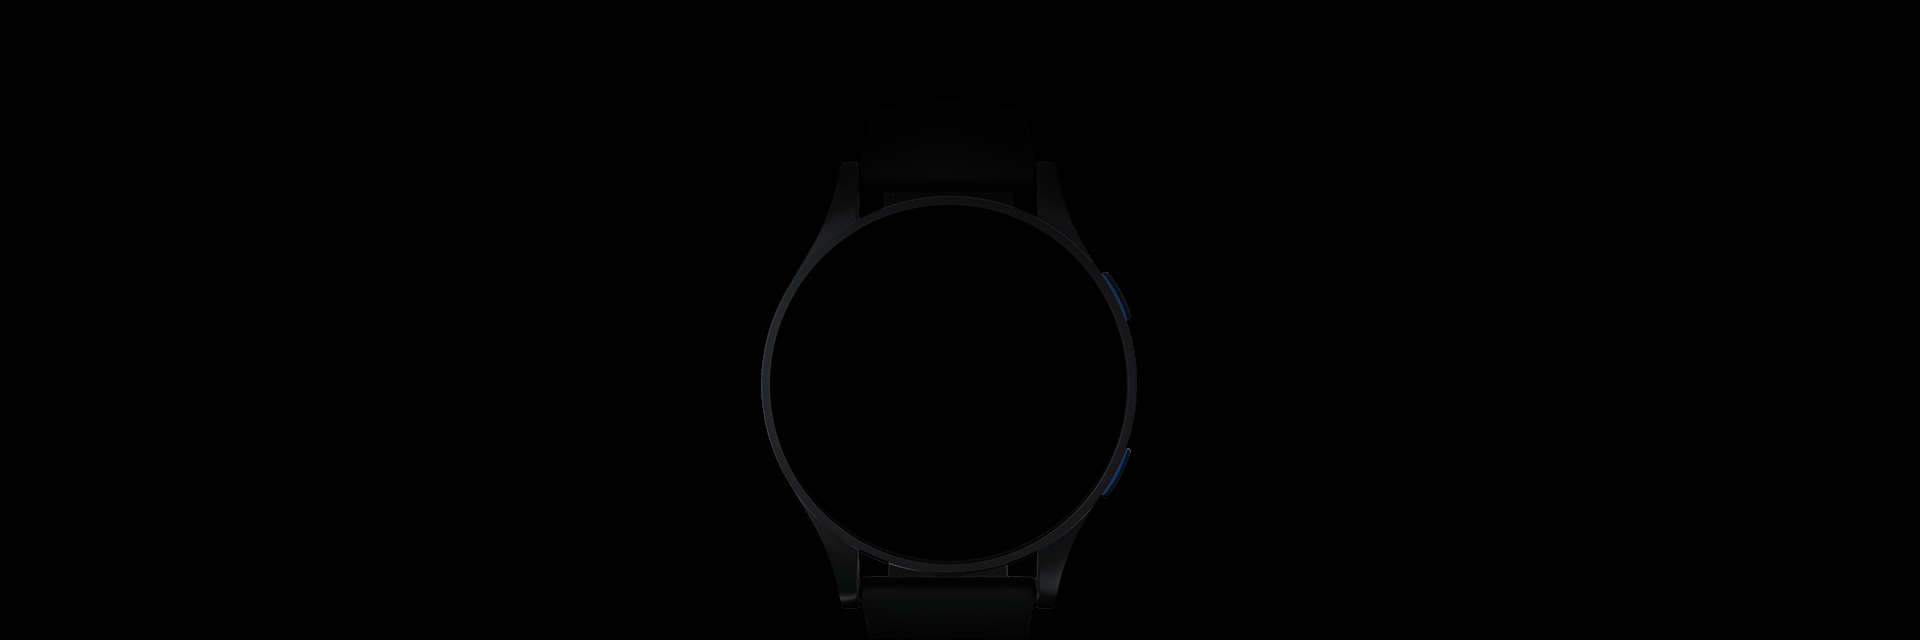 Samsung Exynos W930 is built into the smartwatch.